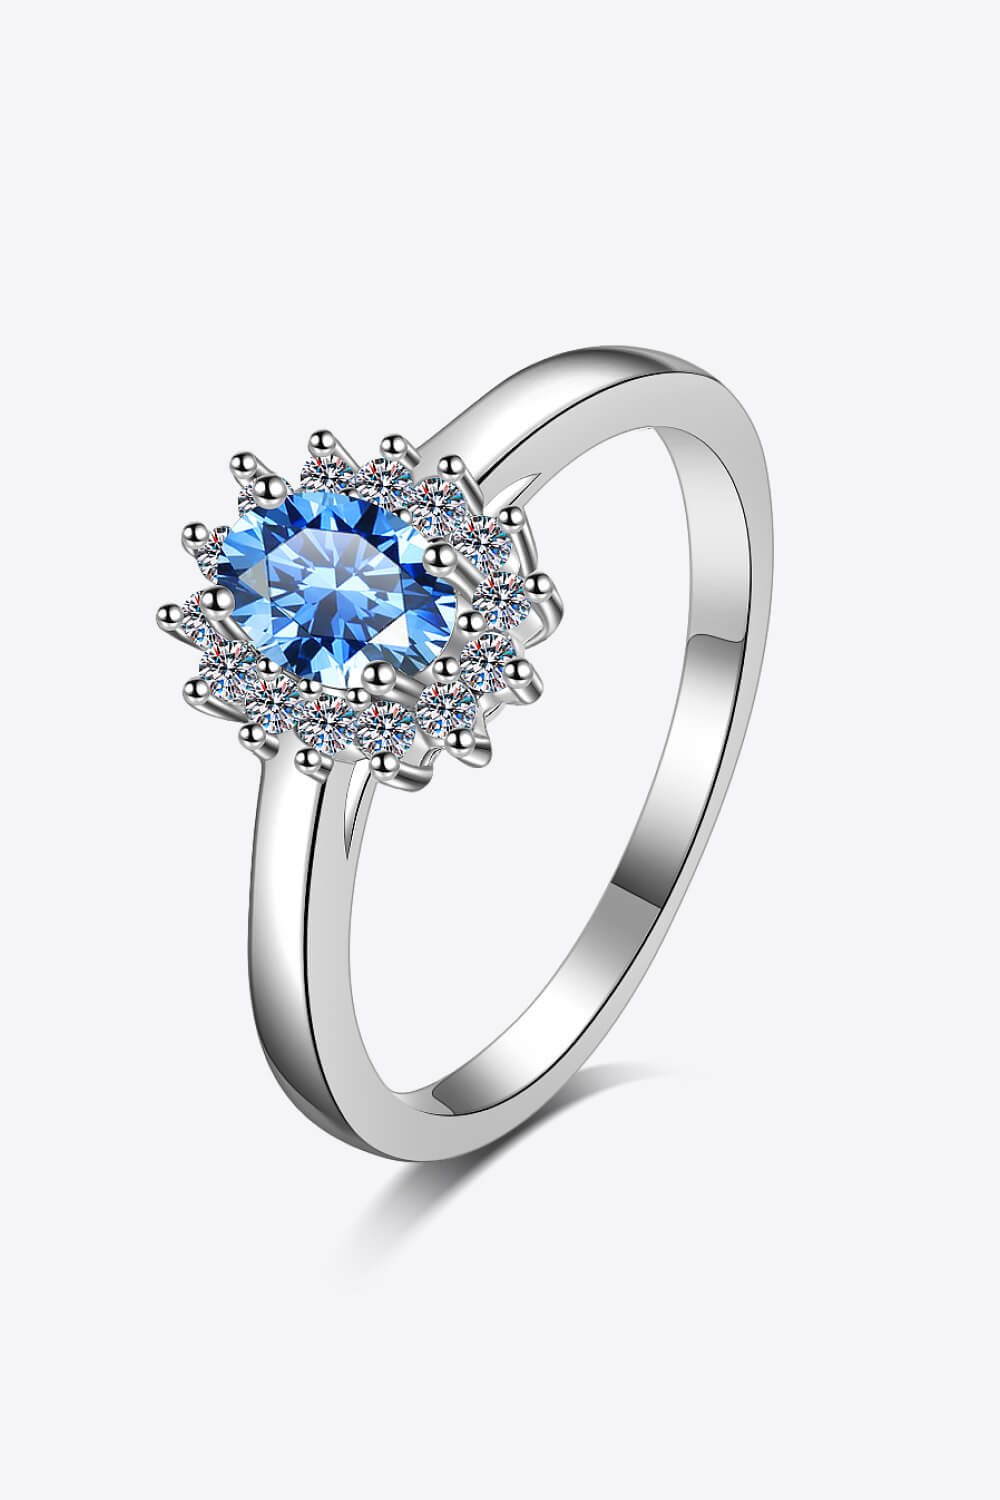 On My Own Moissanite Ring BLUE ZONE PLANET